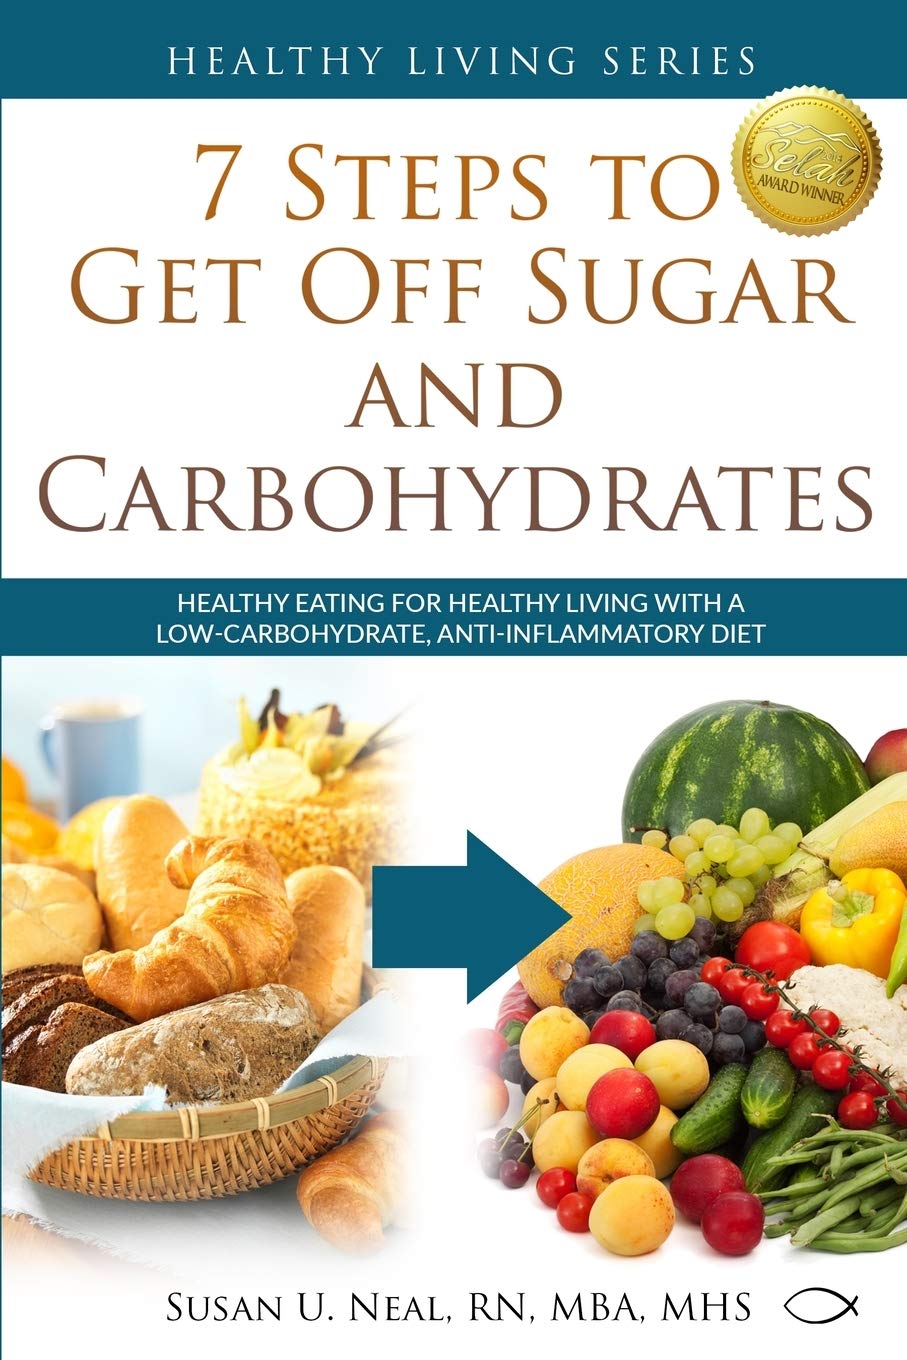 "7 Steps to Get Off Sugar and Carbohydrates"